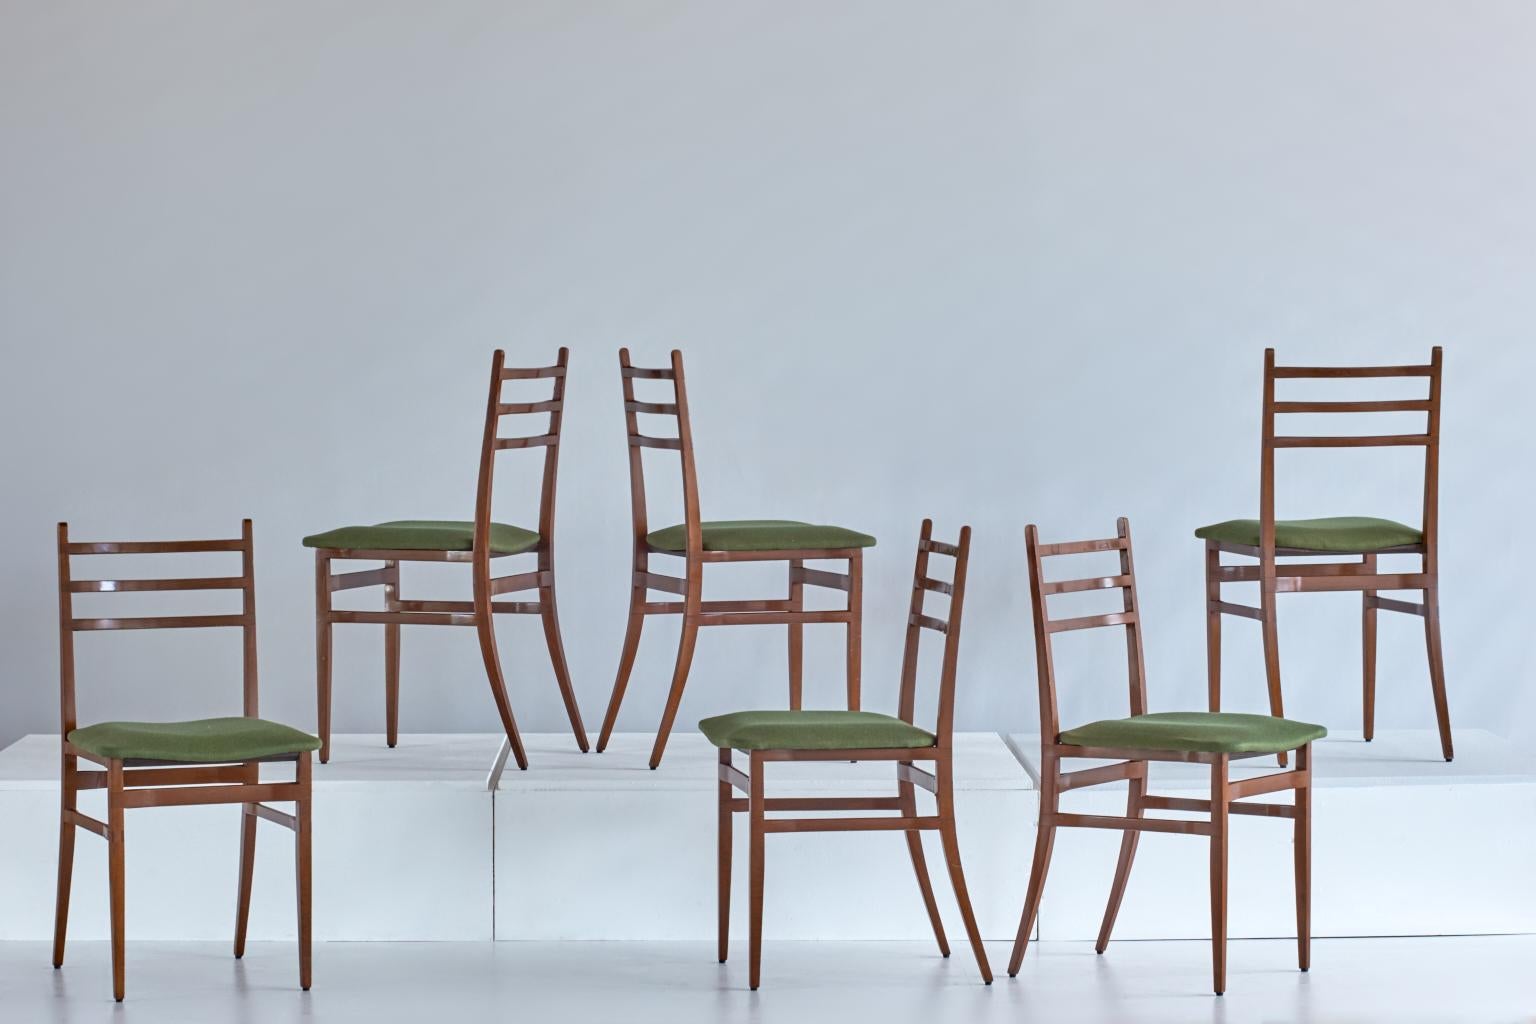 Italian modernist design is known for its experimental and bold character. Simultaneously emphasizing the elegant, it often pushes the boundaries of material and idea. This set of six dining chairs by Guglielmo Ulrich offers an exquisite example of